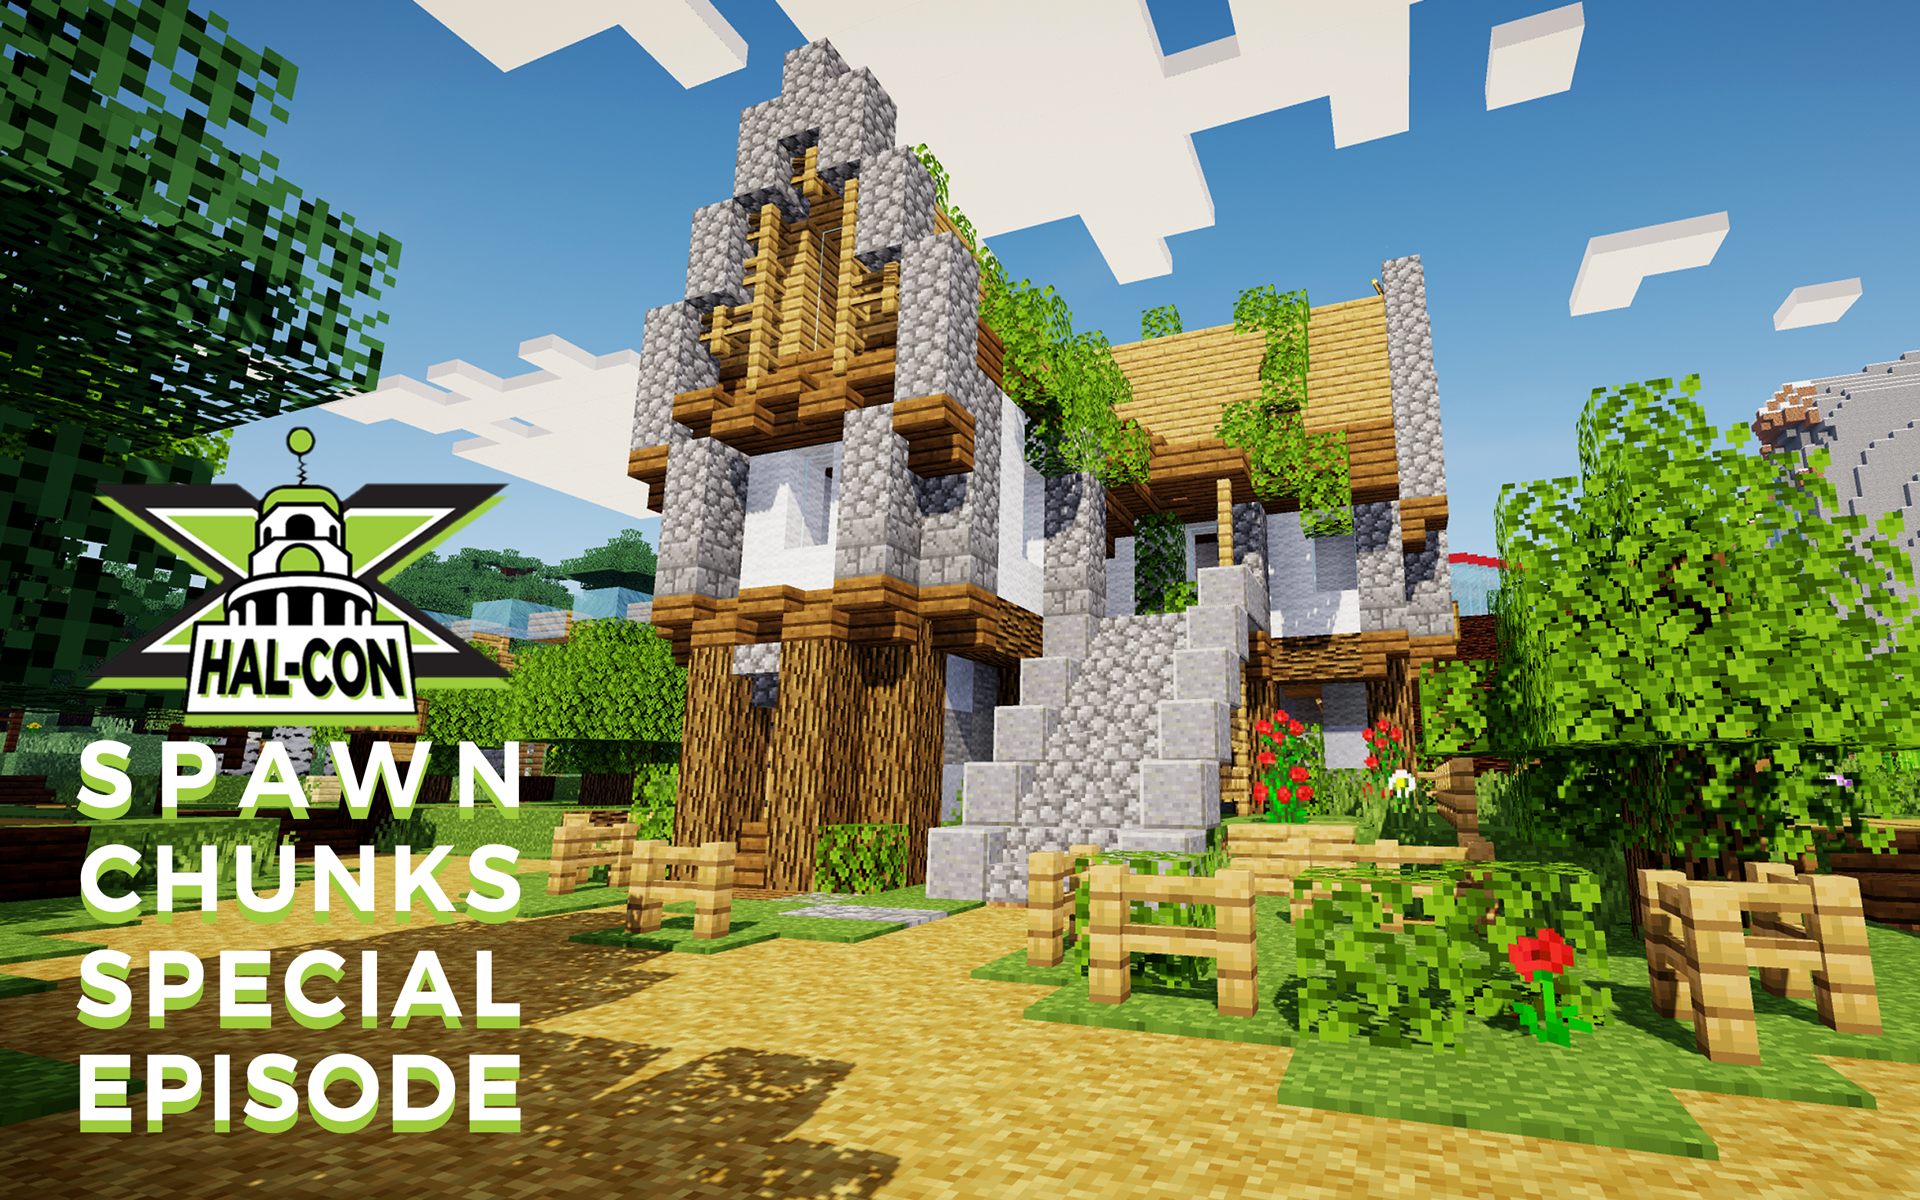 The Spawn Chunks Special: Hal-Con 2019 Minecraft Panel